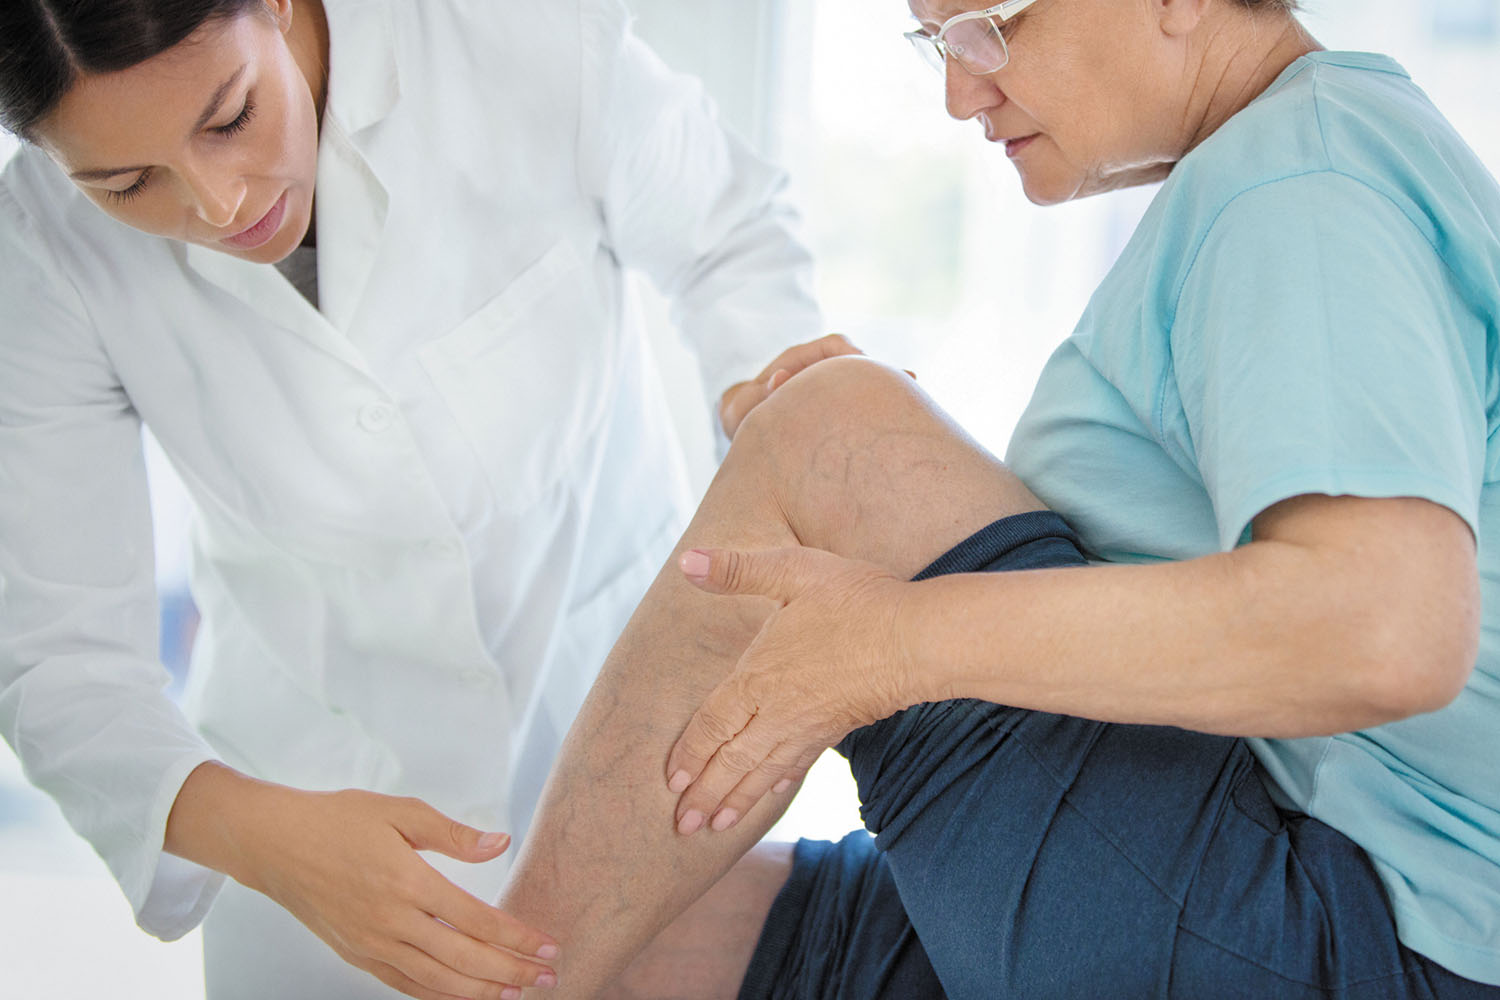 The Most Trusted And Effective Ways To Treat Varicose Veins